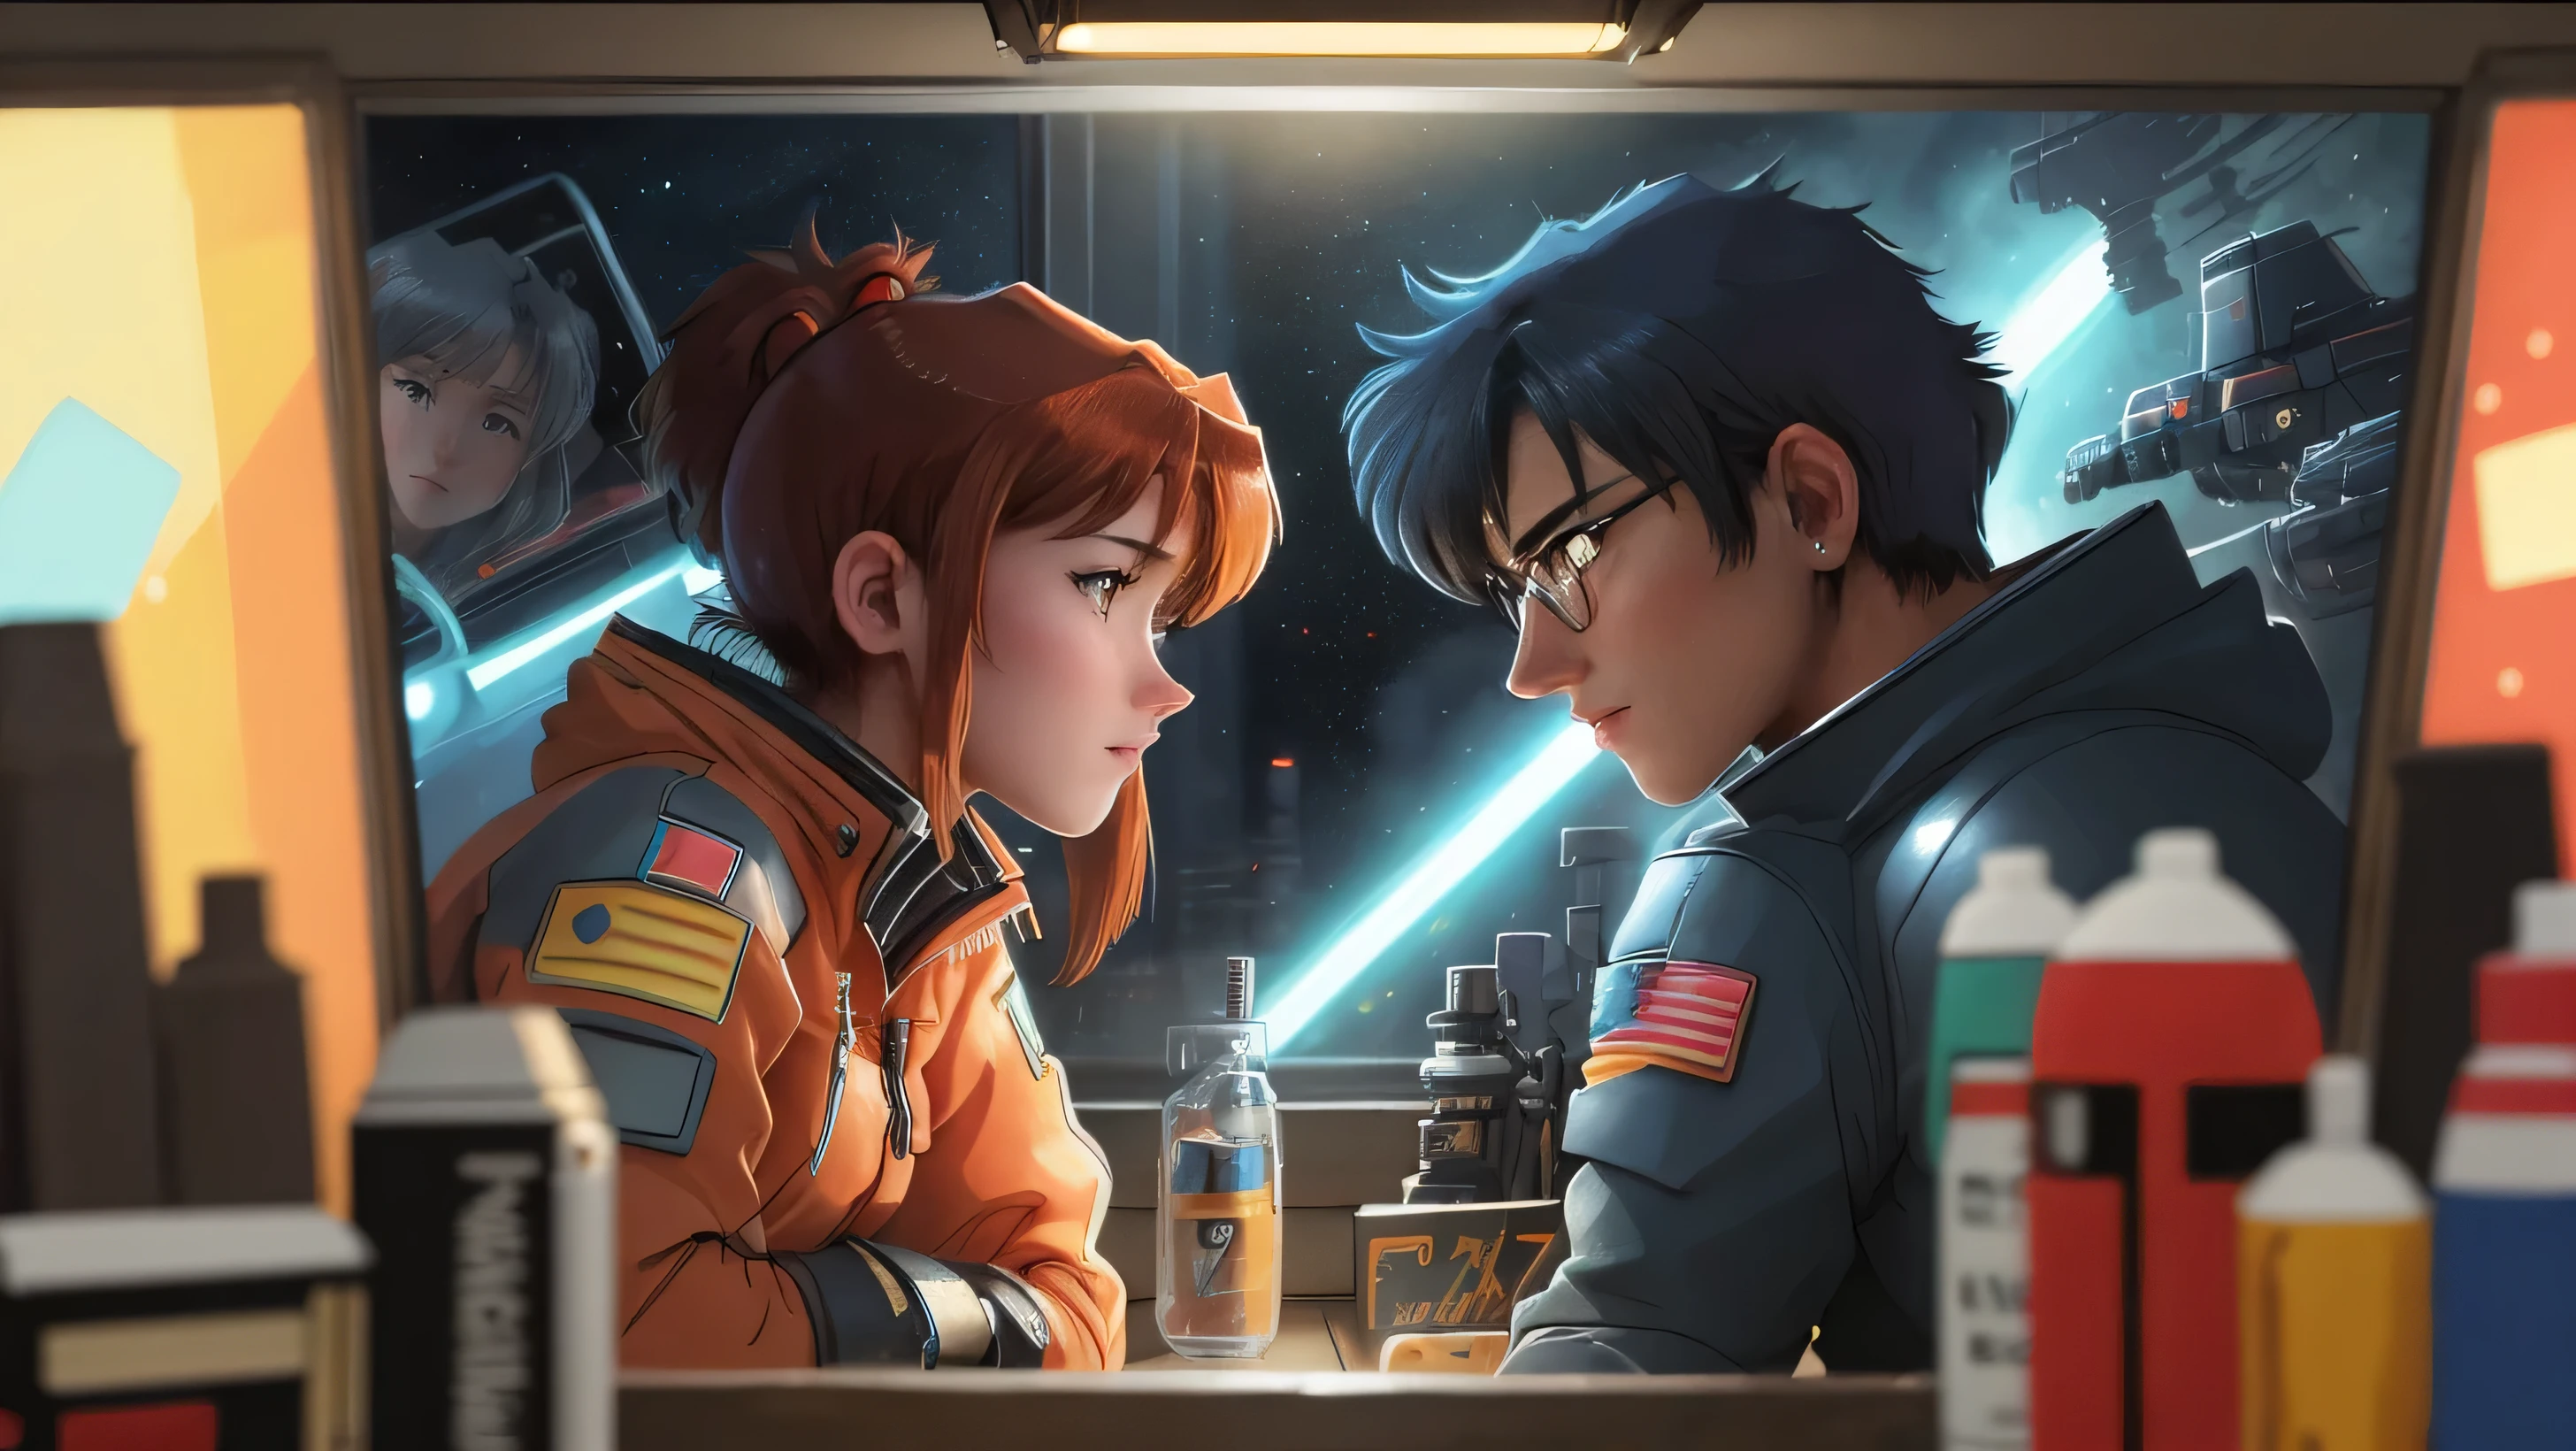 best quality,ultra-detailed,realistic,portrait,oil painting,cowboy bebop,spaceship,space bounty hunter,dark atmosphere,colorful,mysterious,neon lights,sharp focus,vivid colors,smoke-filled room,retro futuristic,moonlight shining through window,blues and jazz music,expressive characters,dominant red and blue tones,dynamic action scenes,astral landscapes,blurred motion,gritty urban settings,complex emotions,characteristics of each main character,Ed's goggles